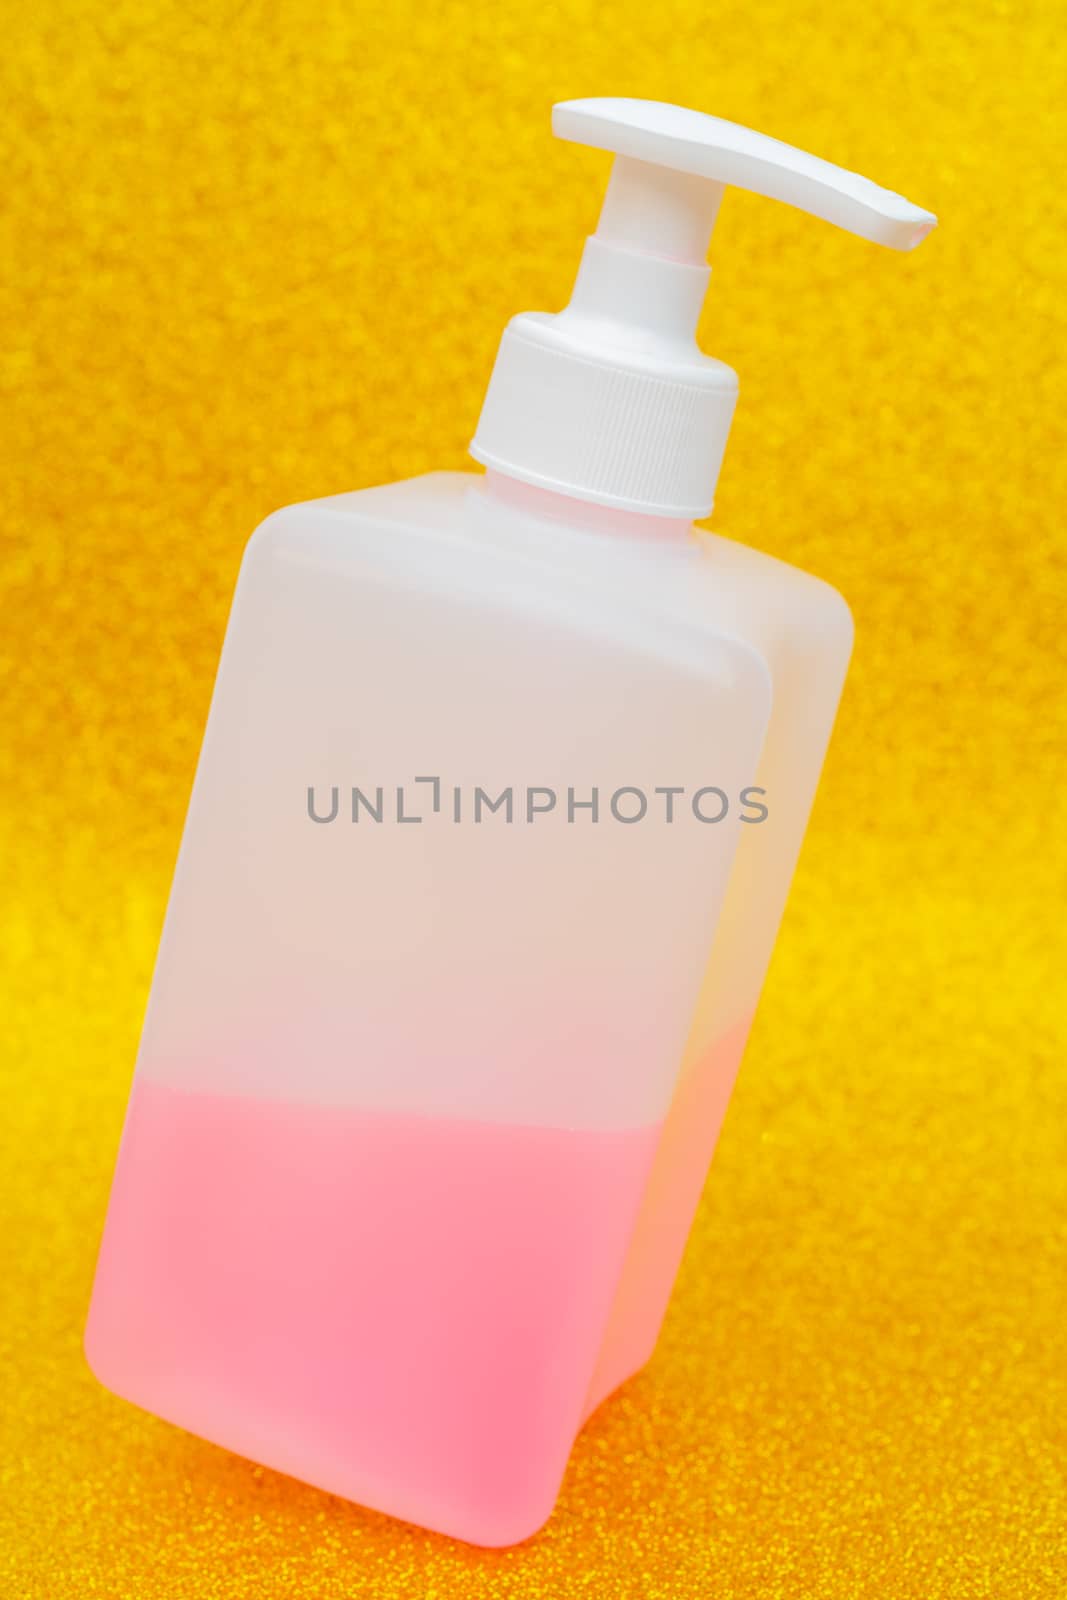 Antibacterial disinfectant soap. Liquid pink soap in white bottle.